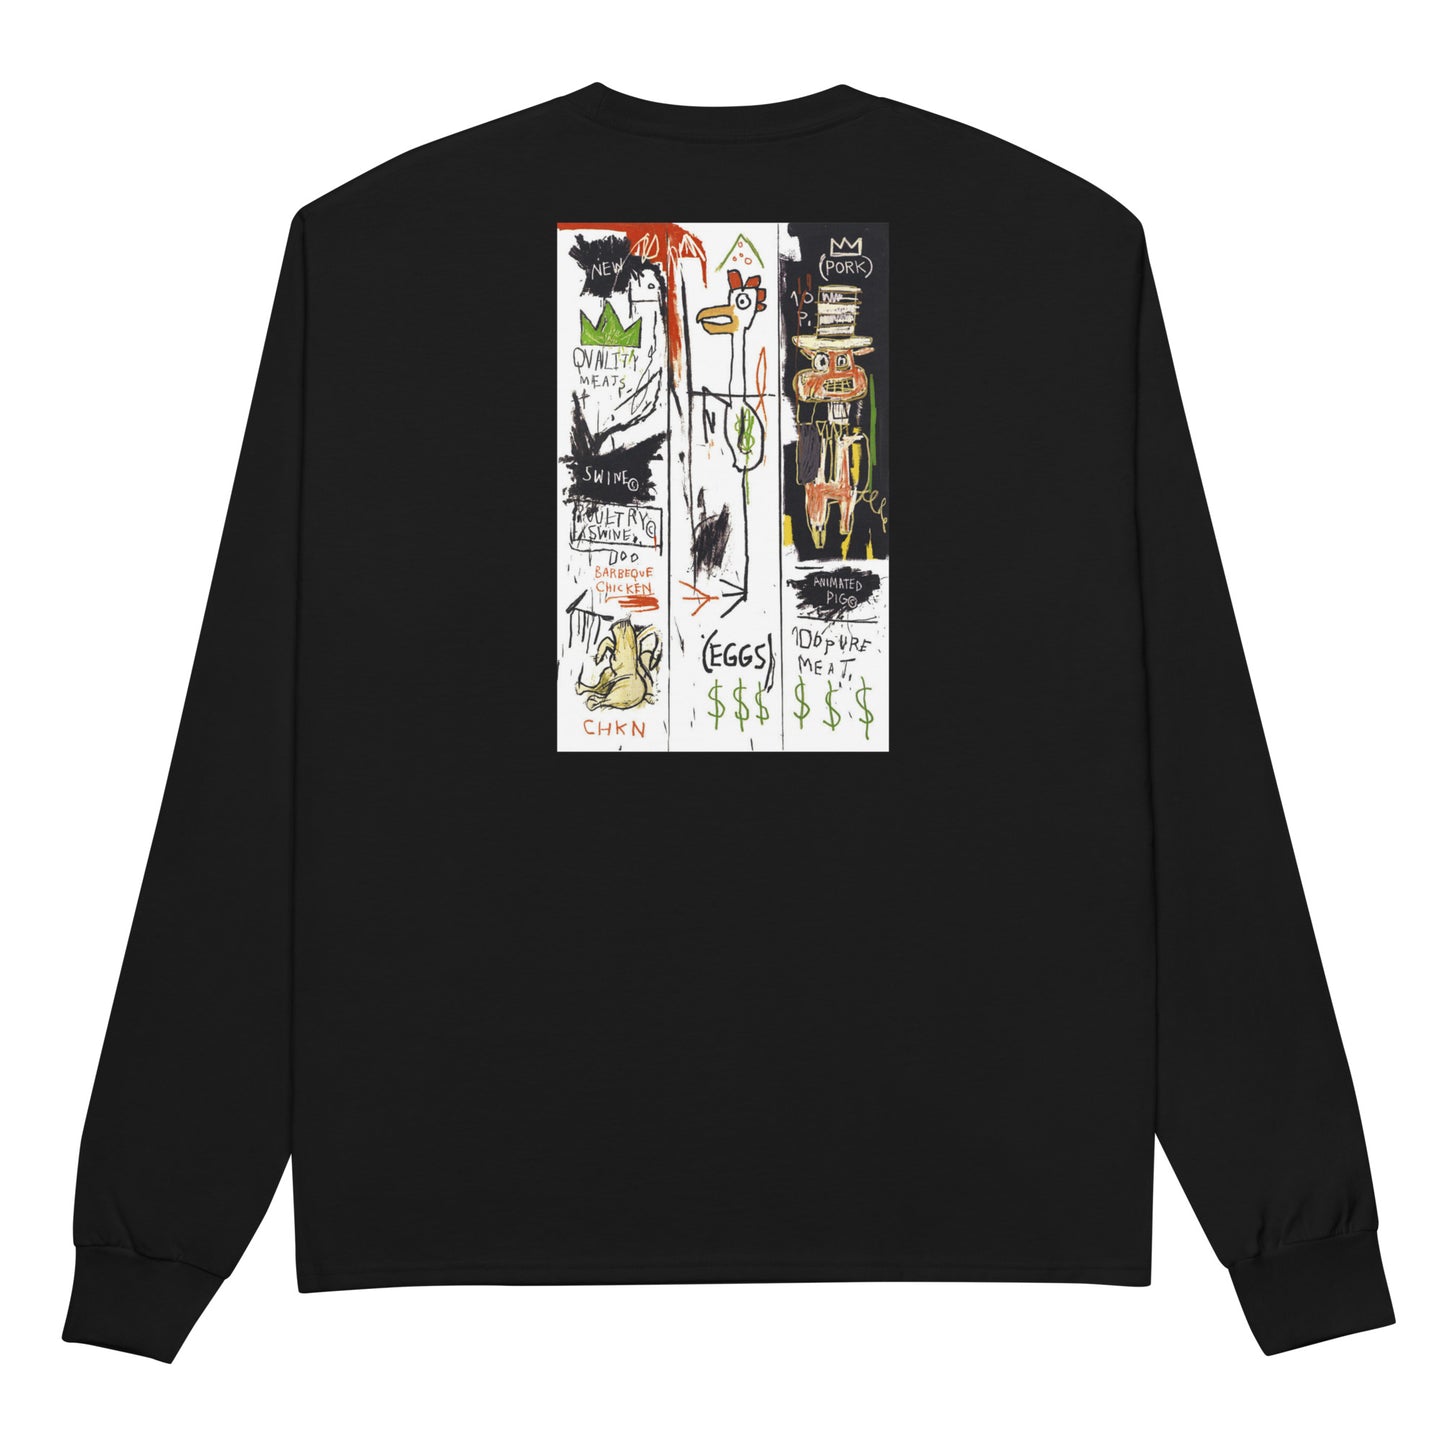 Jean-Michel Basquiat "Quality Meats for the Public" Artwork Embroidered + Printed Premium Champion Streetwear Long Sleeve Shirt Black